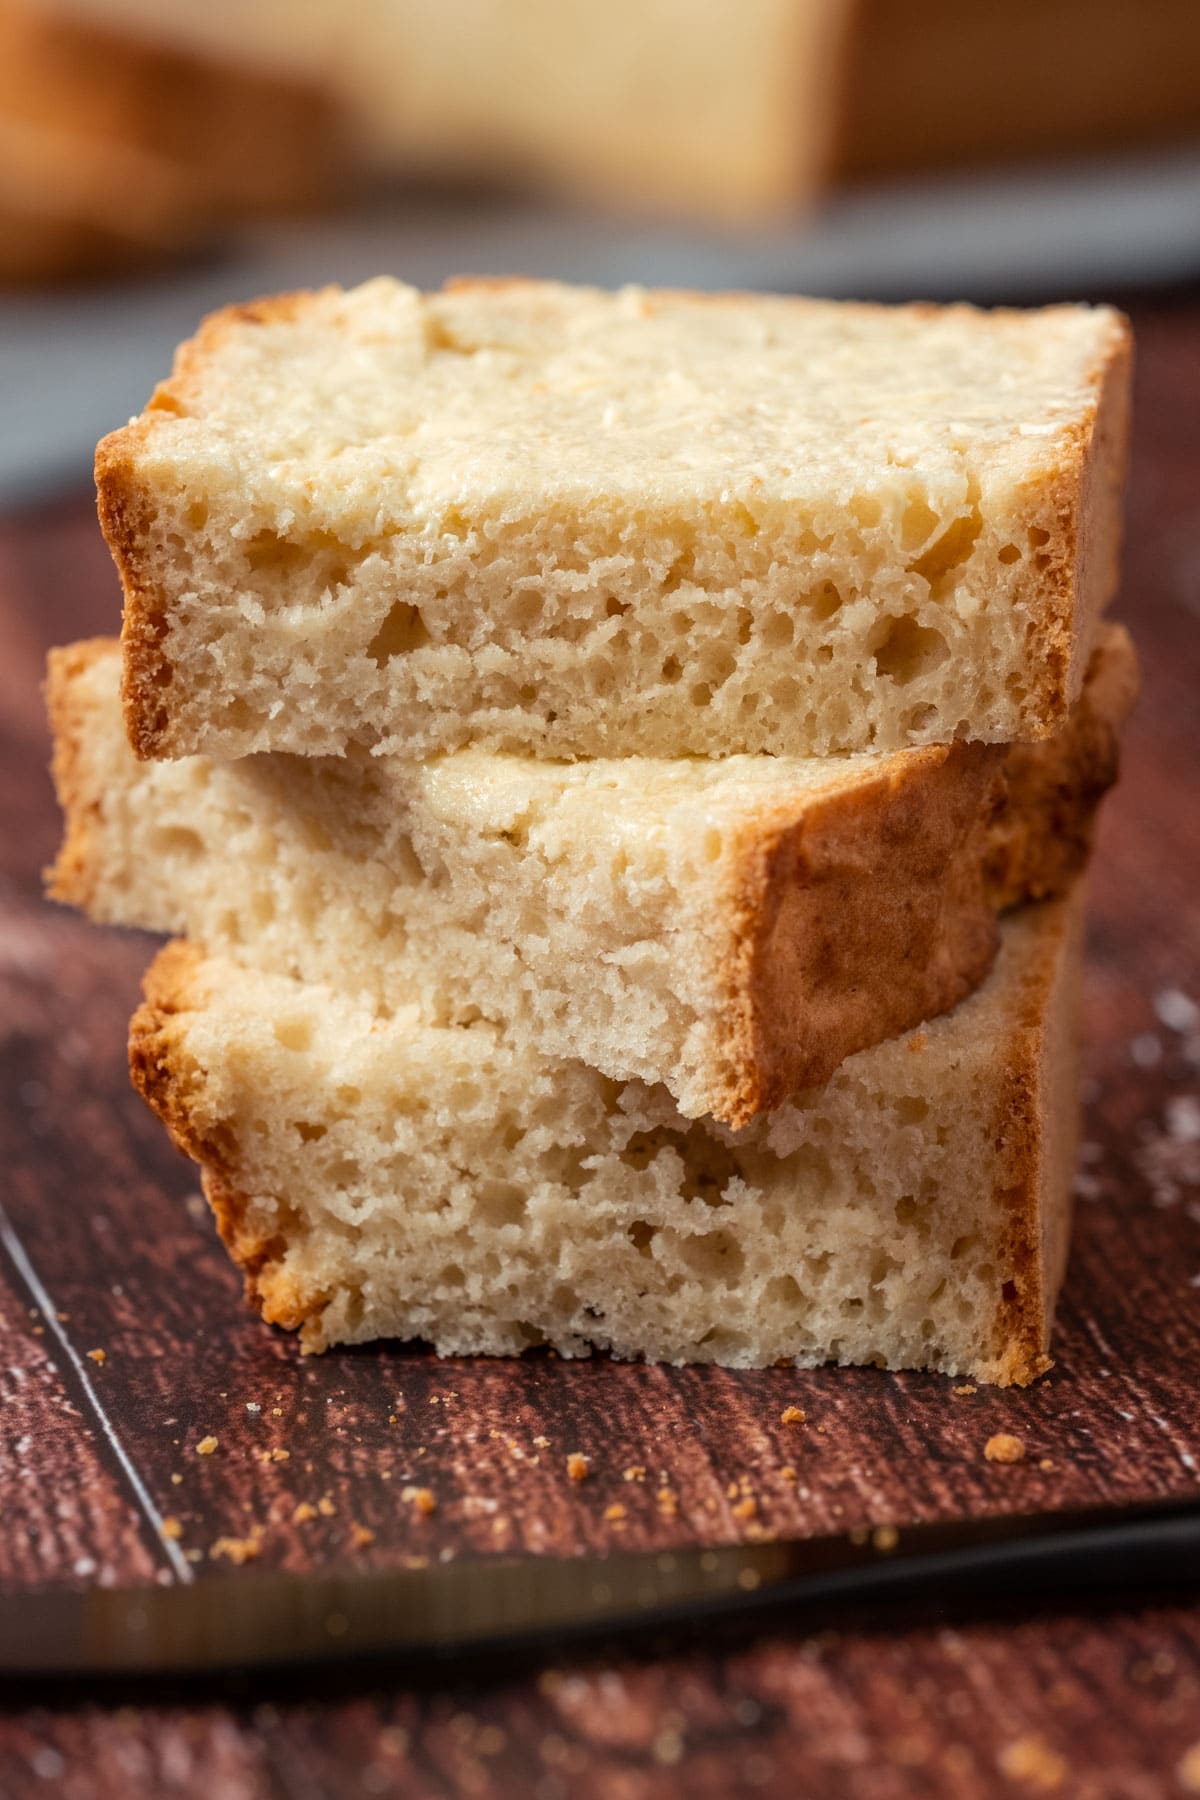 Buttered slices of vegan beer bread in a stack.